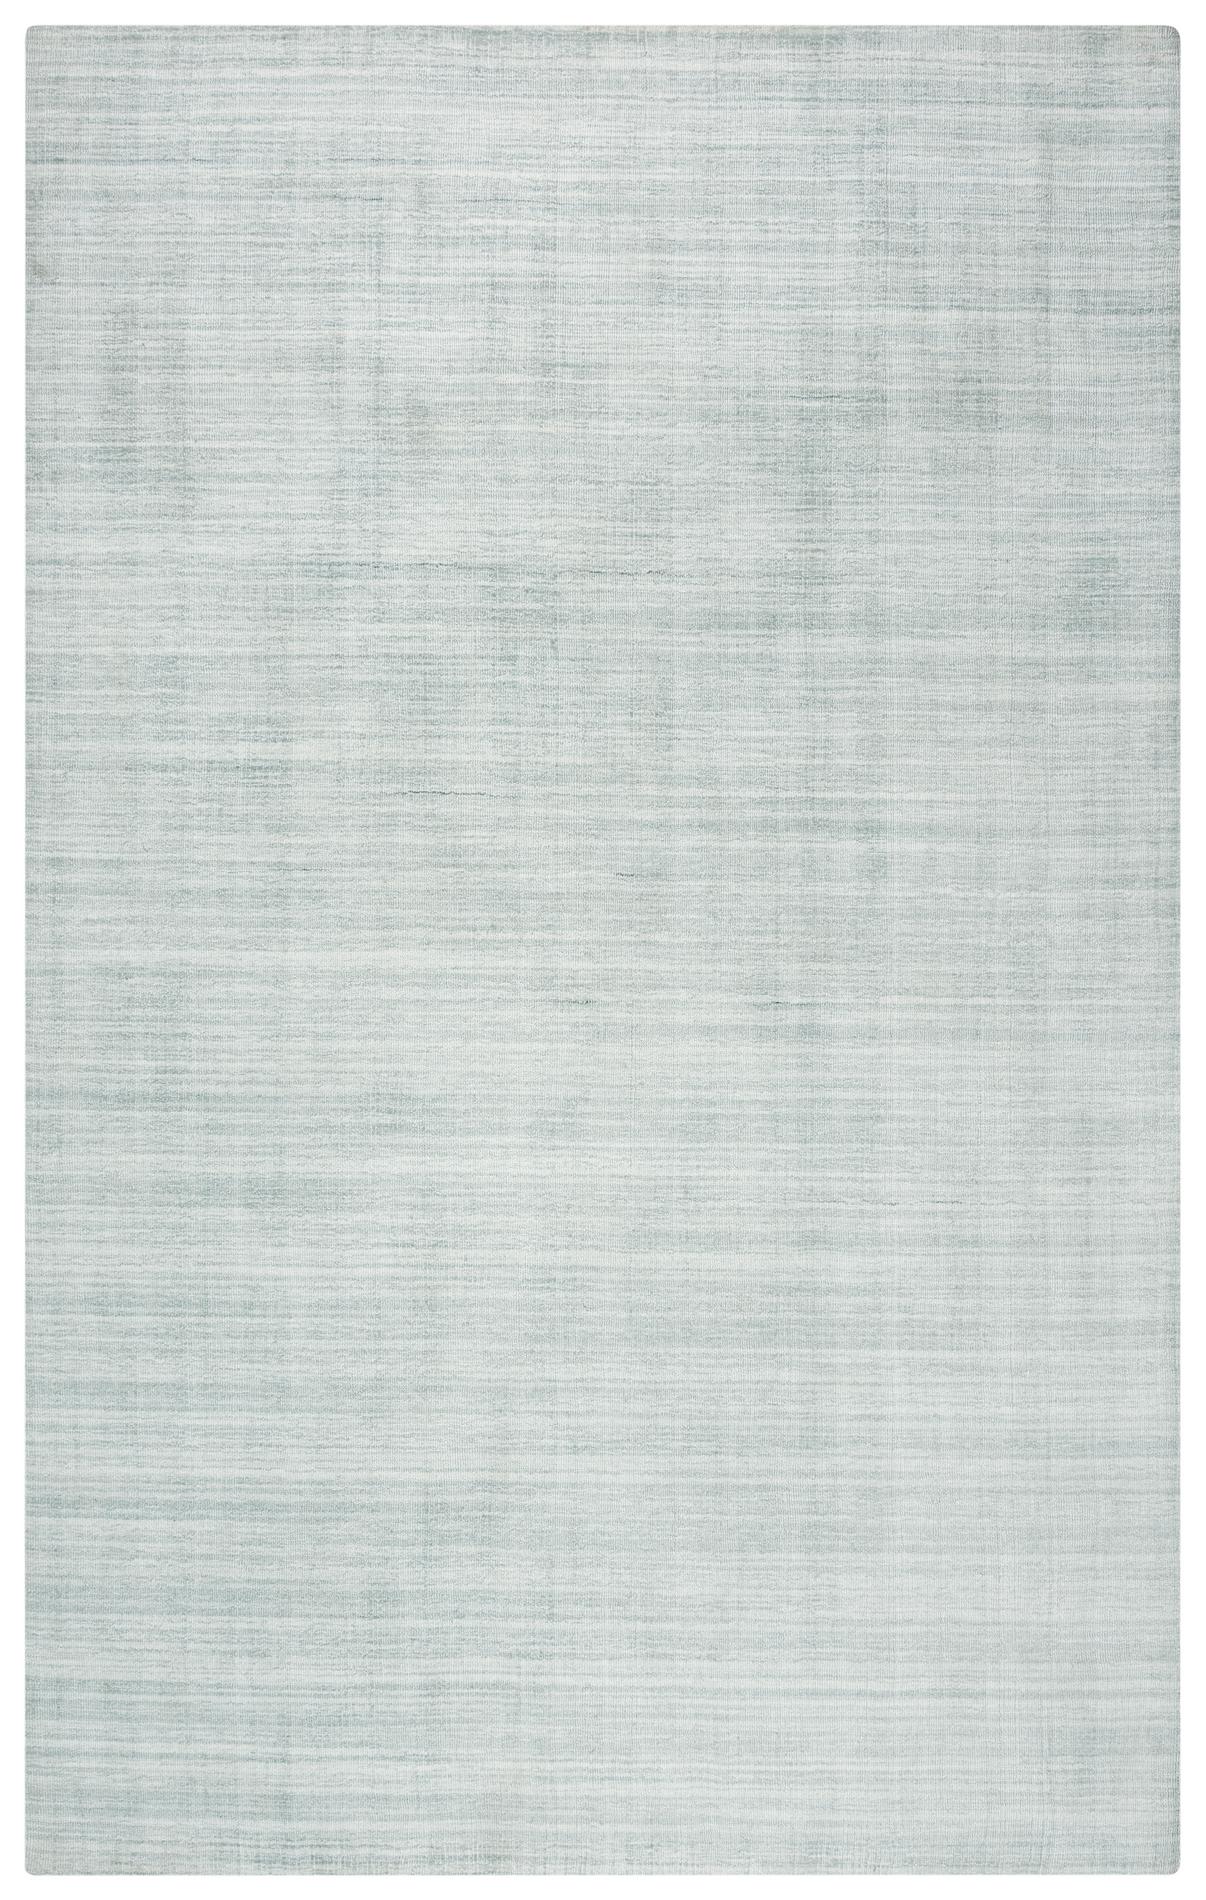 Rizzy Meridian Mrn982 Silver Area Rug